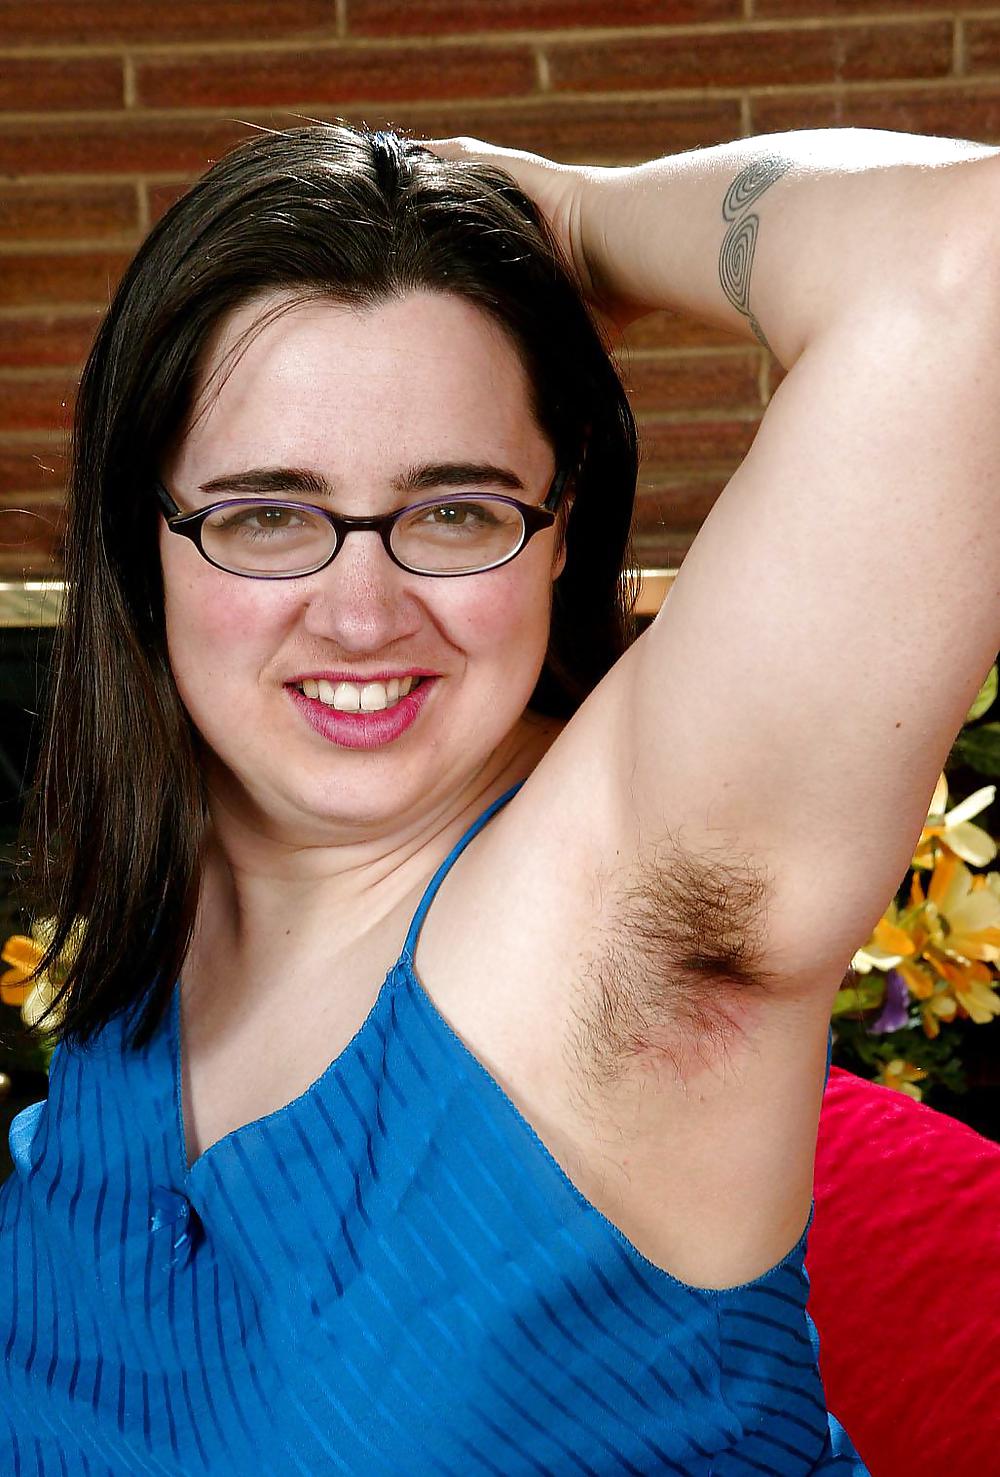 Miscellaneous girls showing hairy, unshaven armpits 5 #35783507